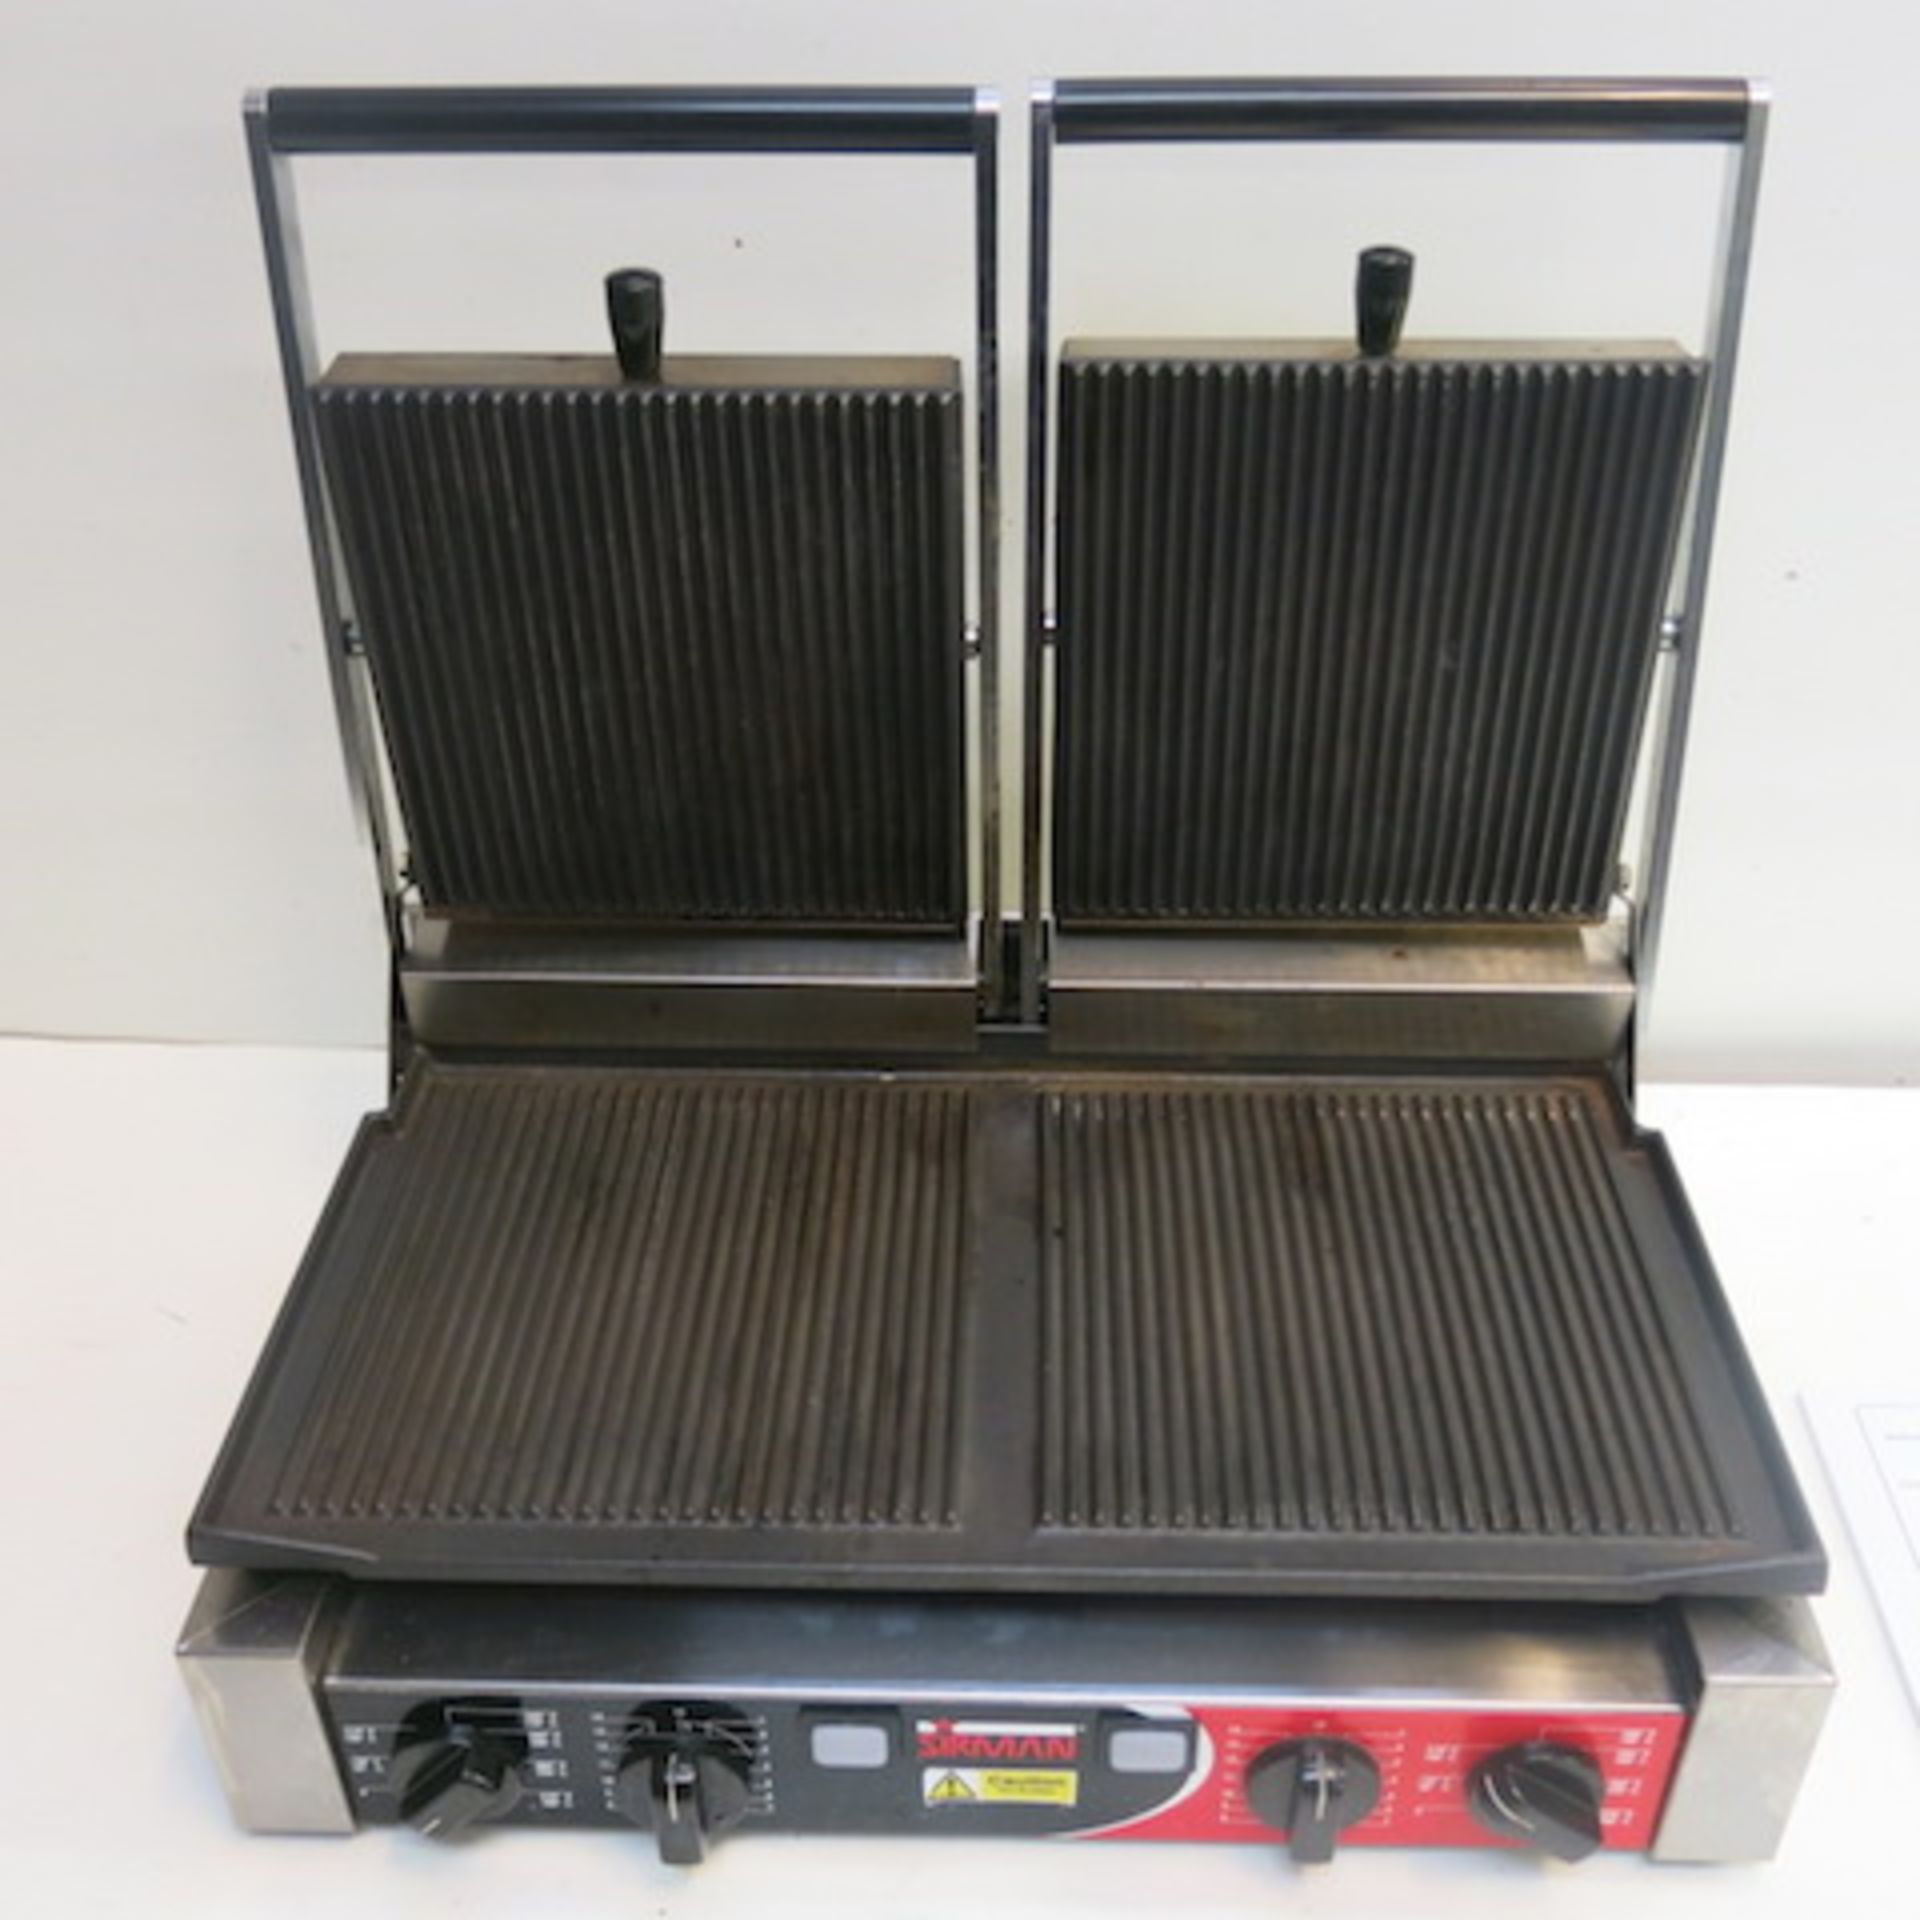 Sirman Stainless Steel Commercial Twin Panini Maker, Model PDRR/RR. Comes with Instruction Manual - Image 5 of 5